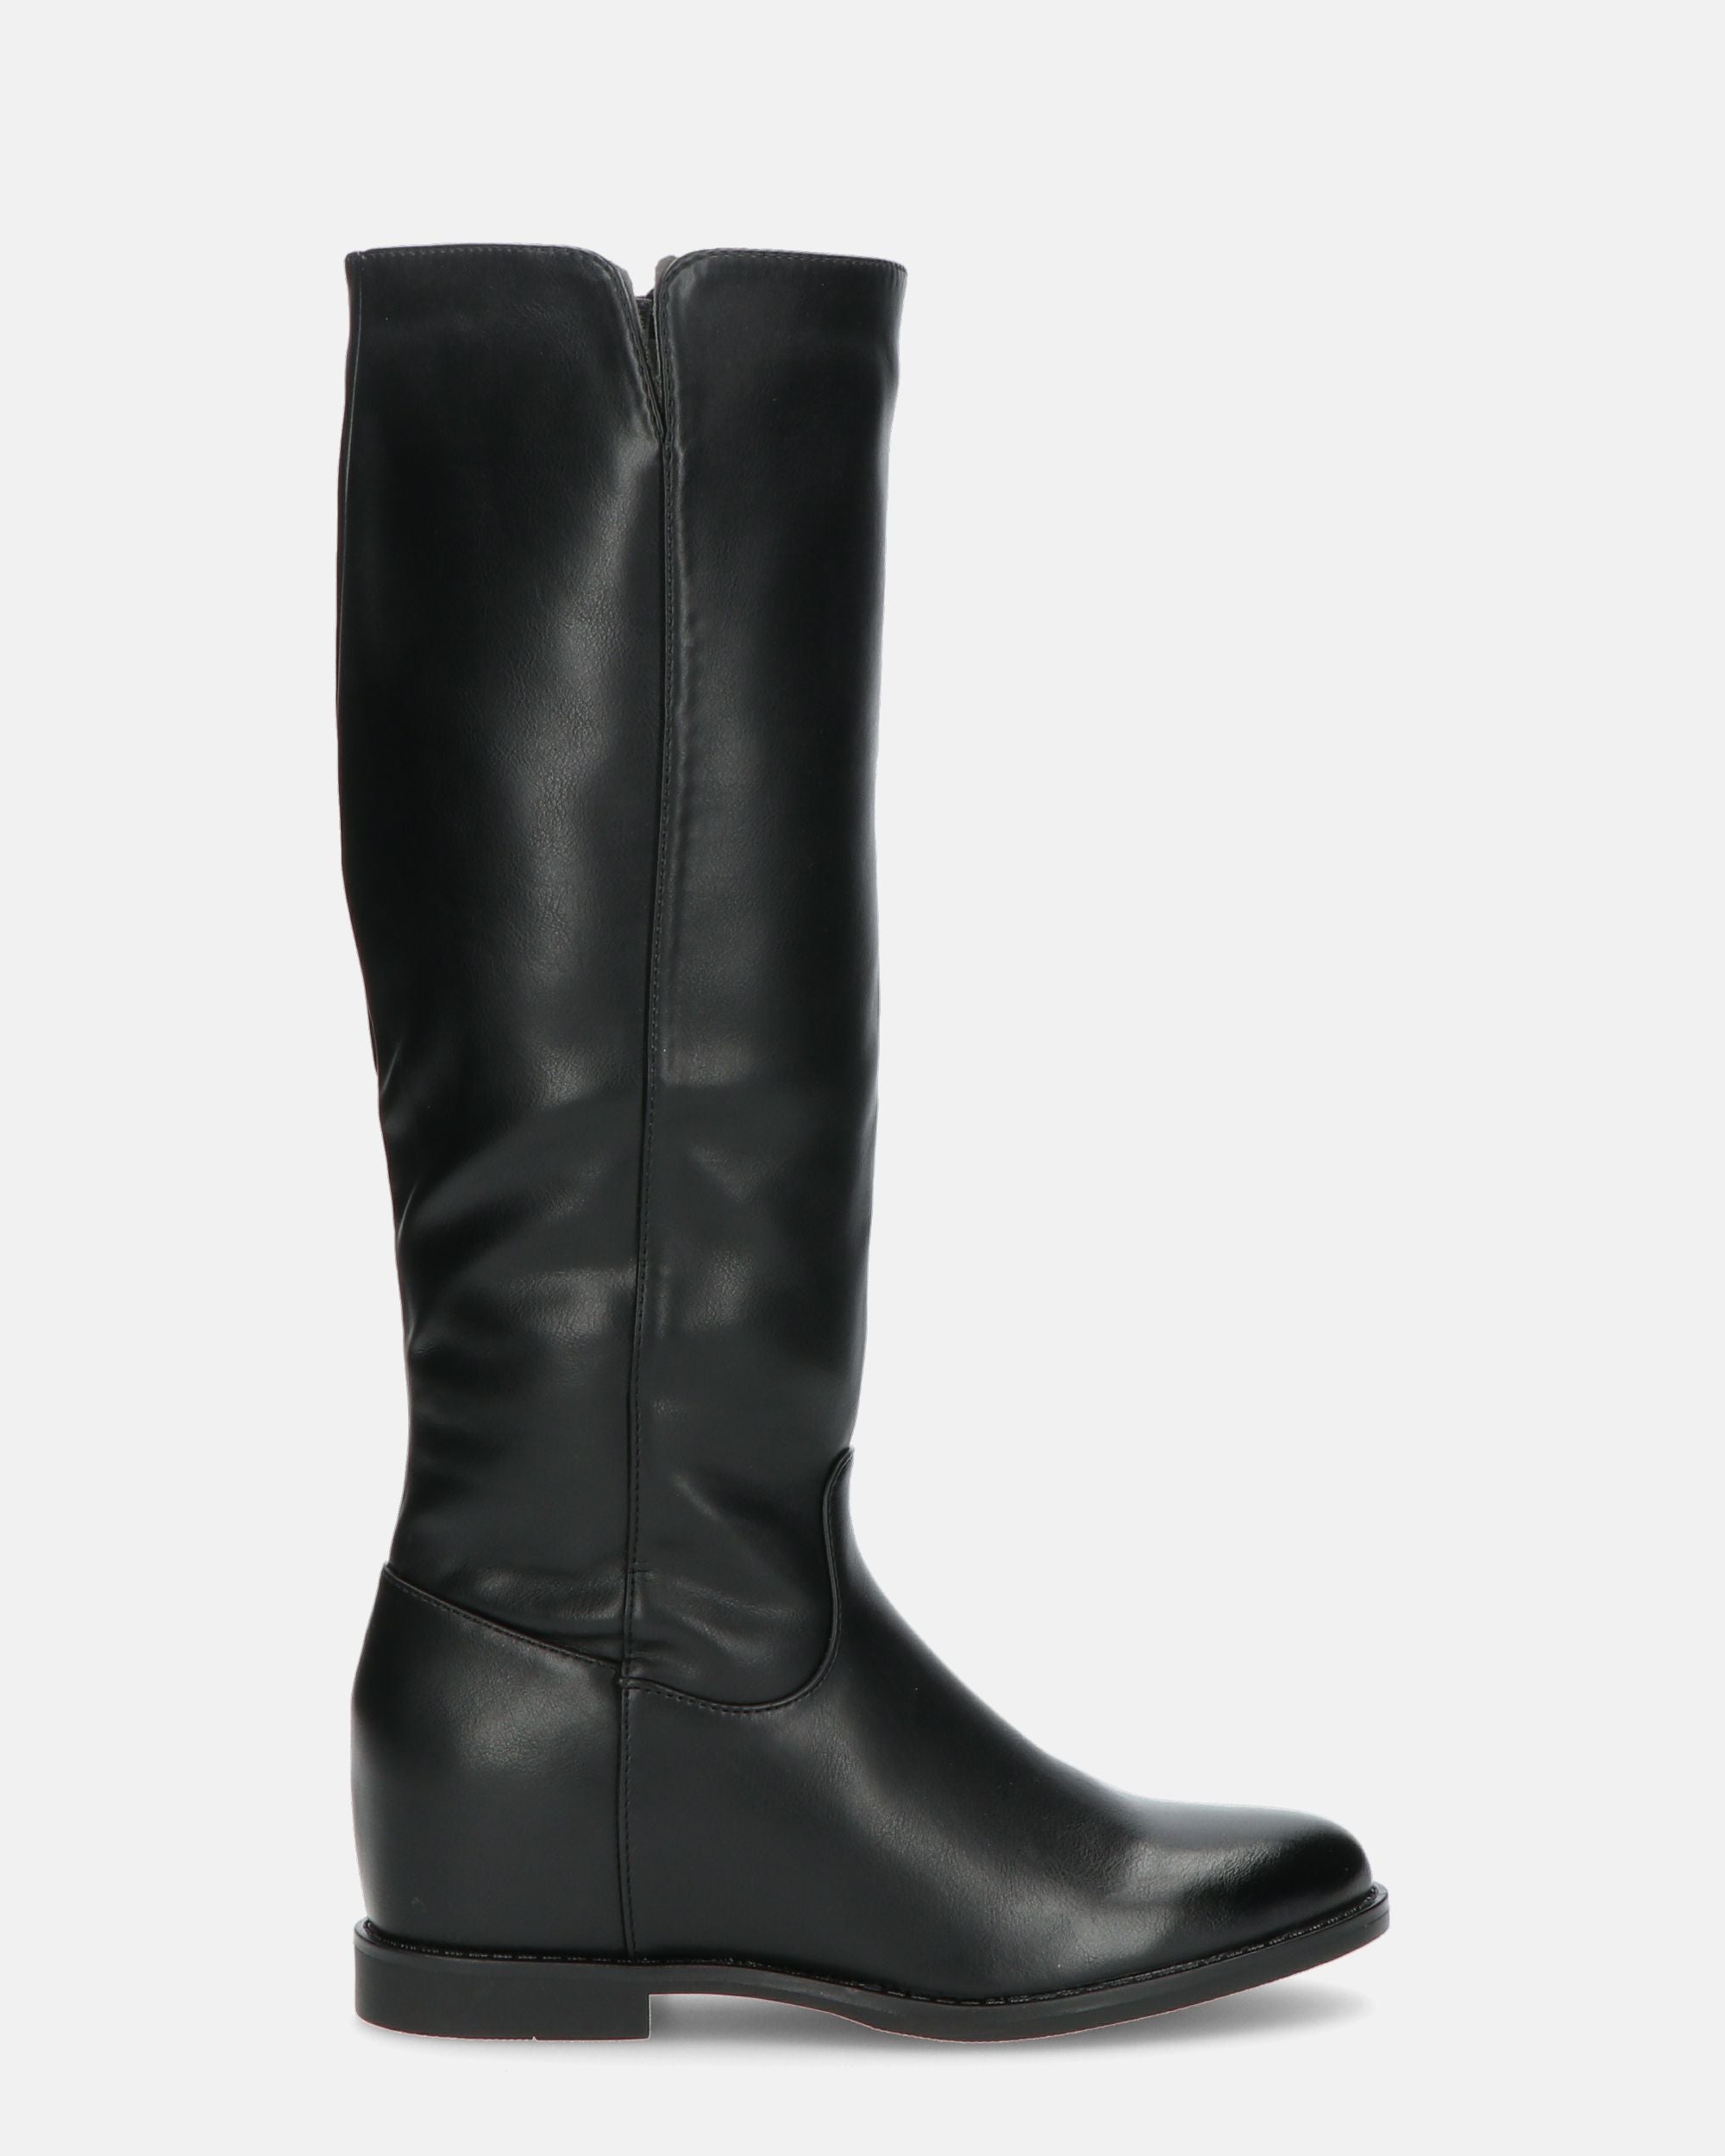 KAMI - high boots in black eco-leather with internal wedge